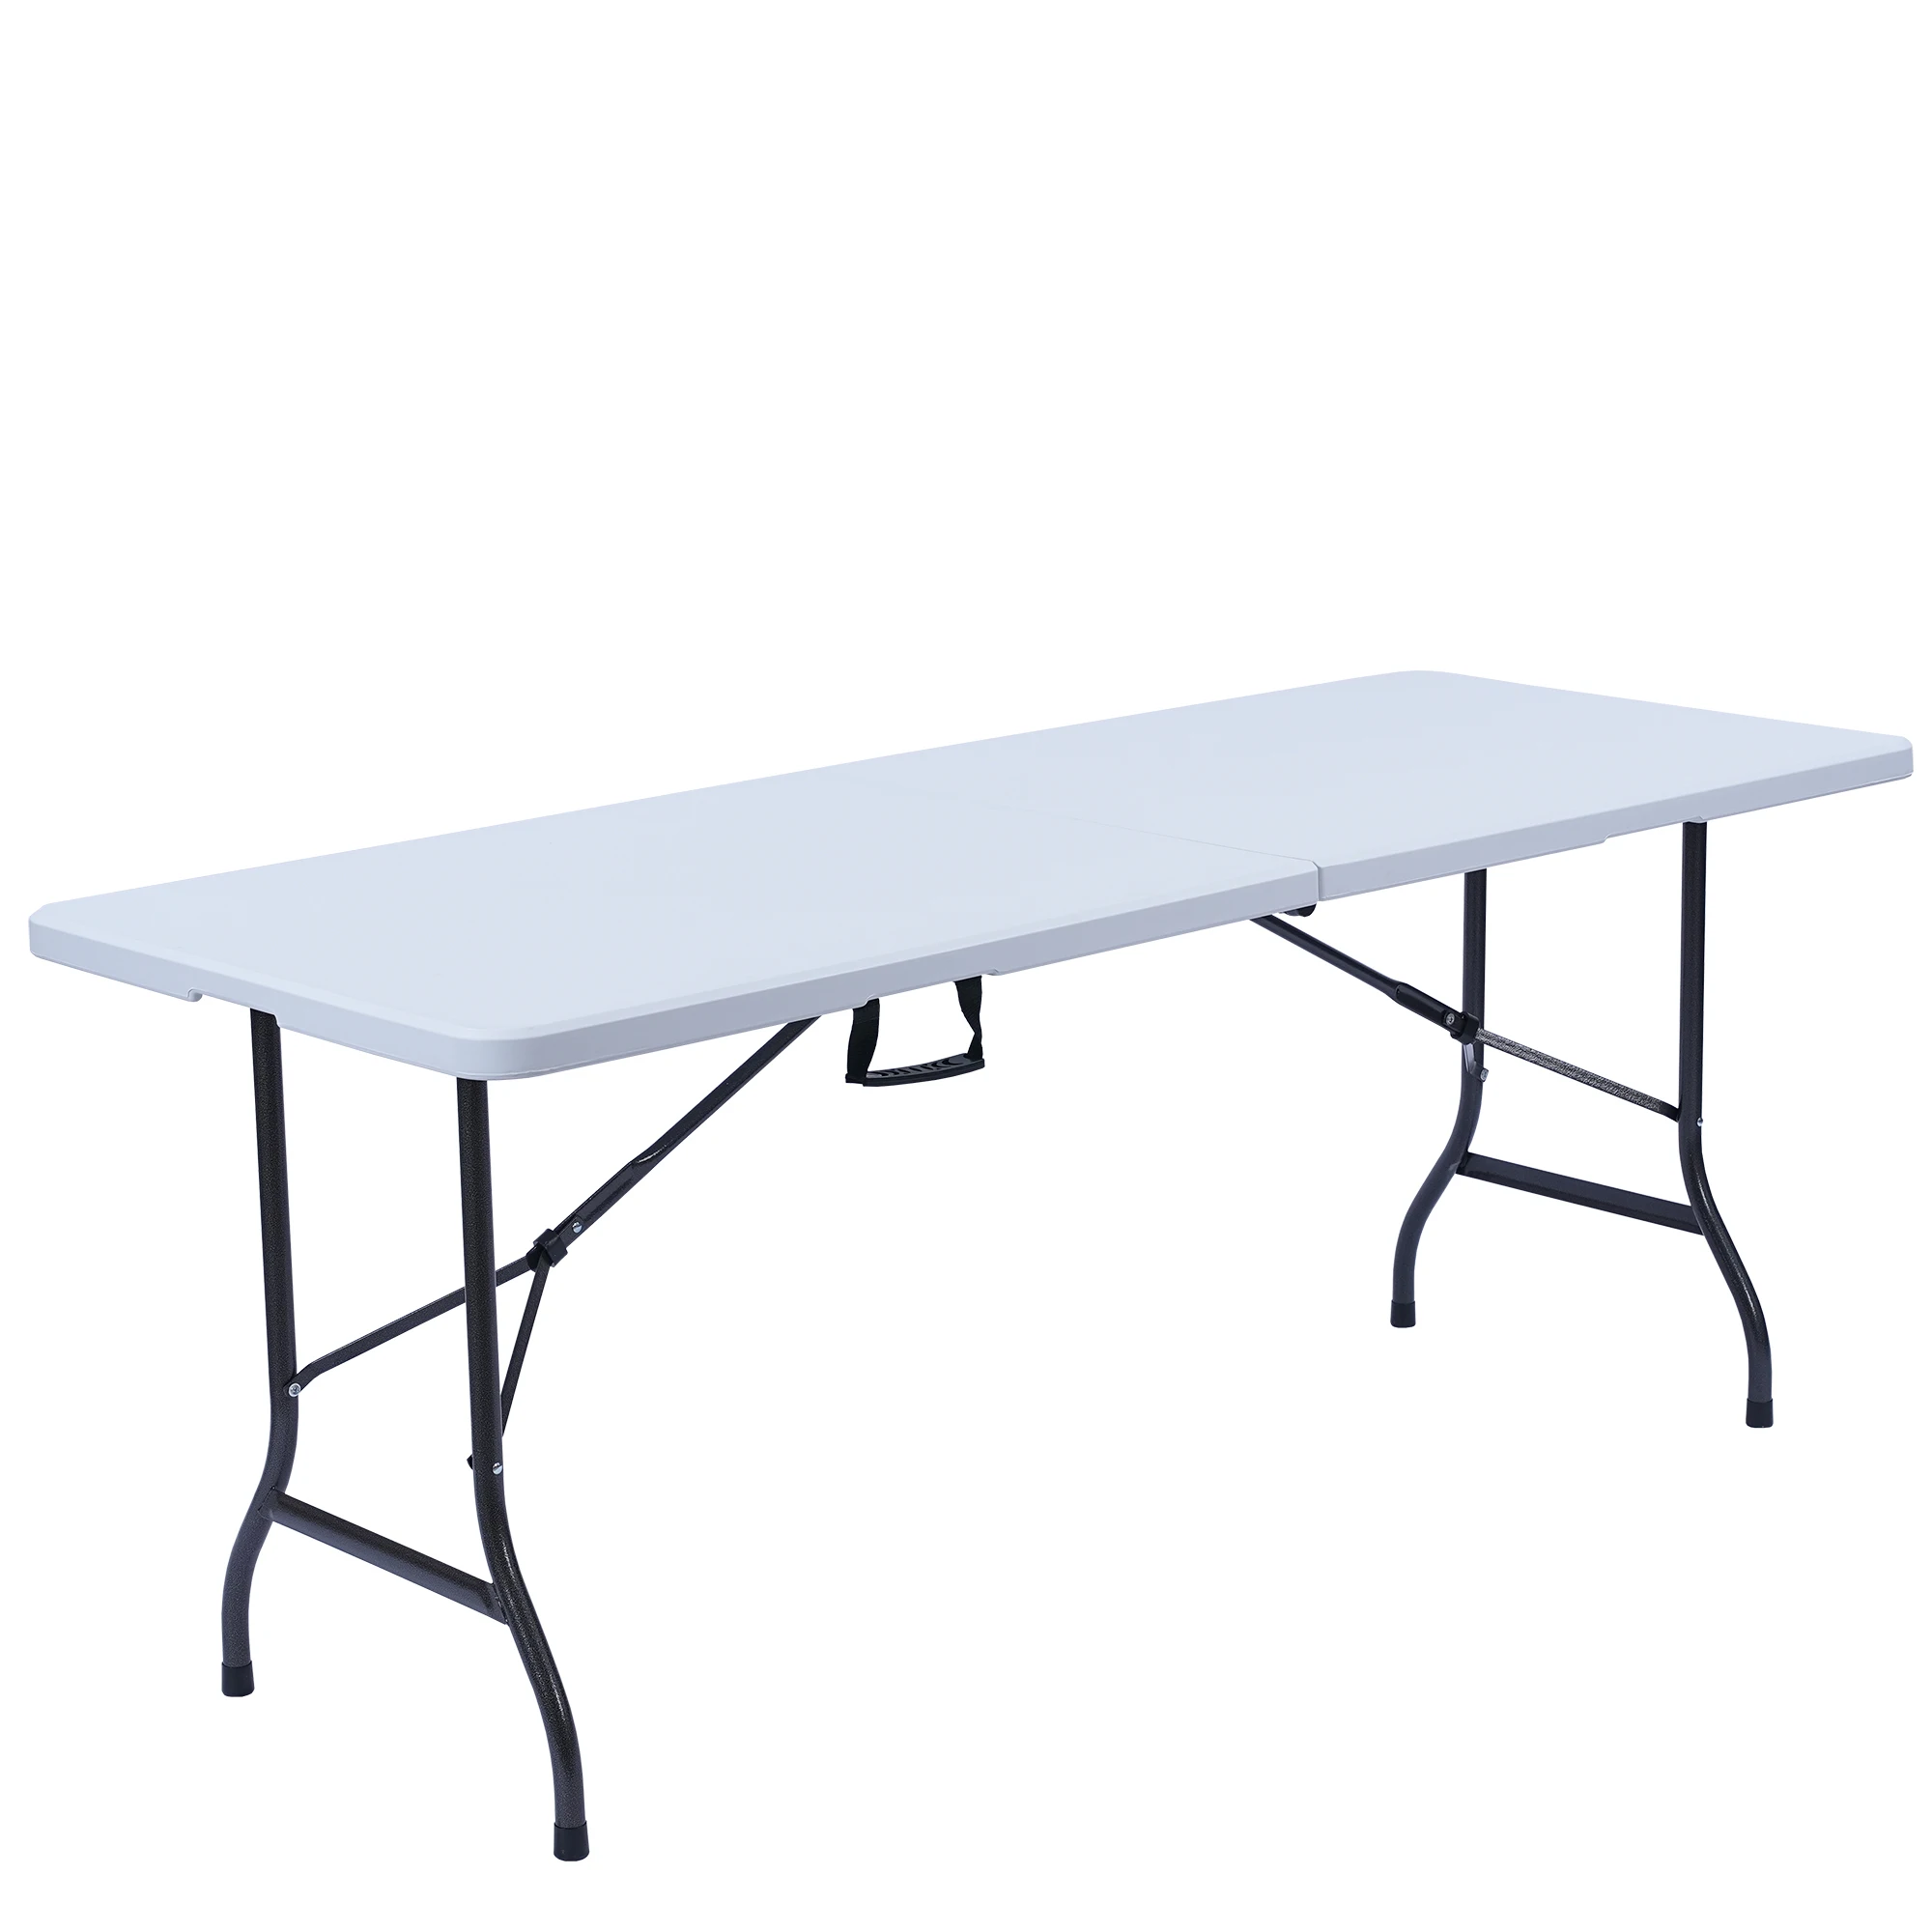 

6 Ft Portable Folding Table, Fold-in-Half Plastic Card Table Dinging Table Garden Table